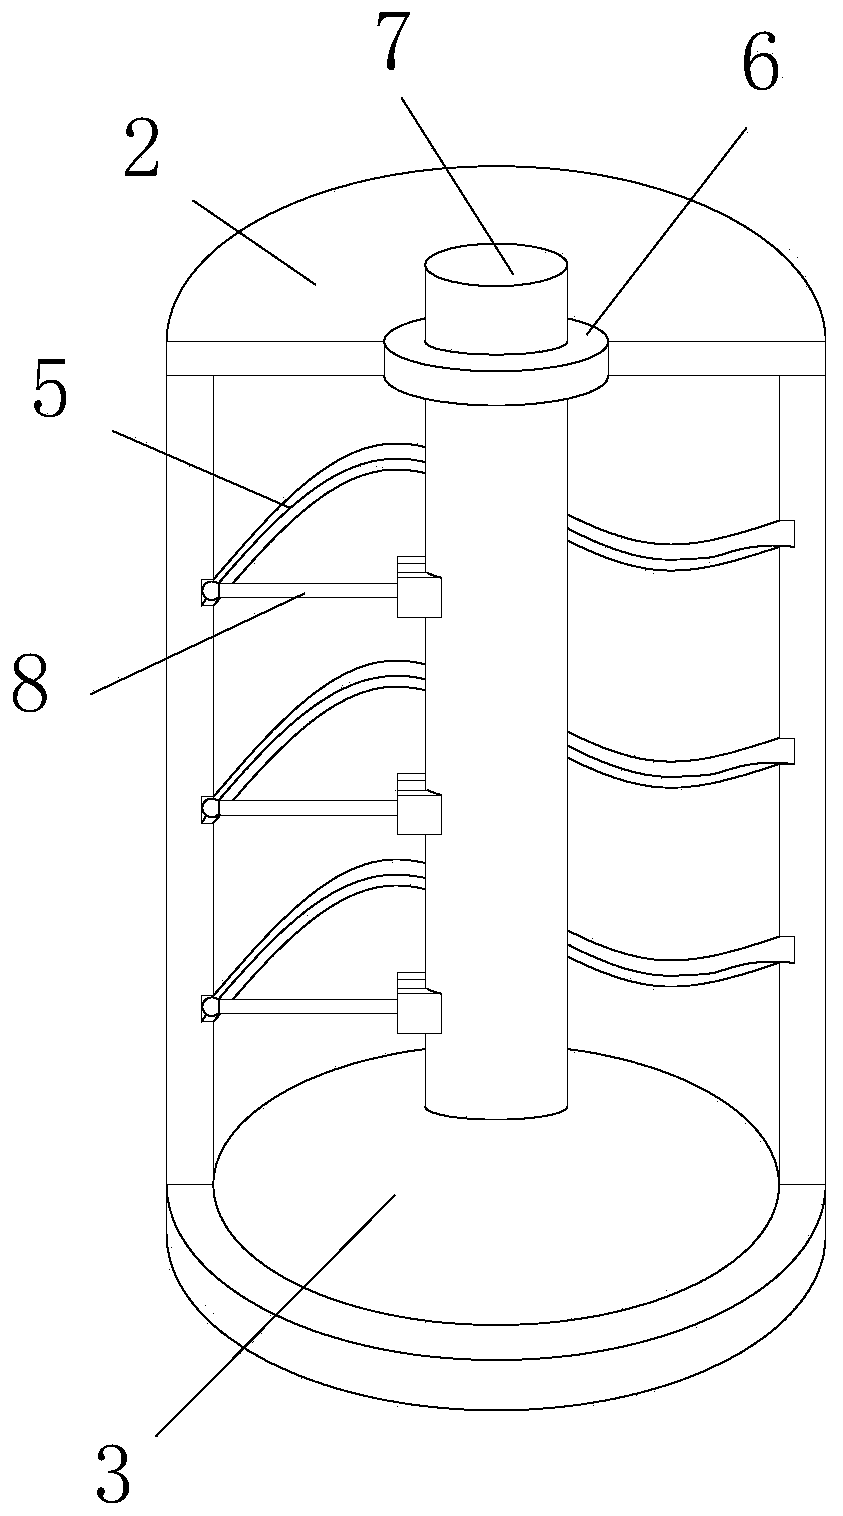 Material separation system based on cyclic separation in ceramic membrane separation process